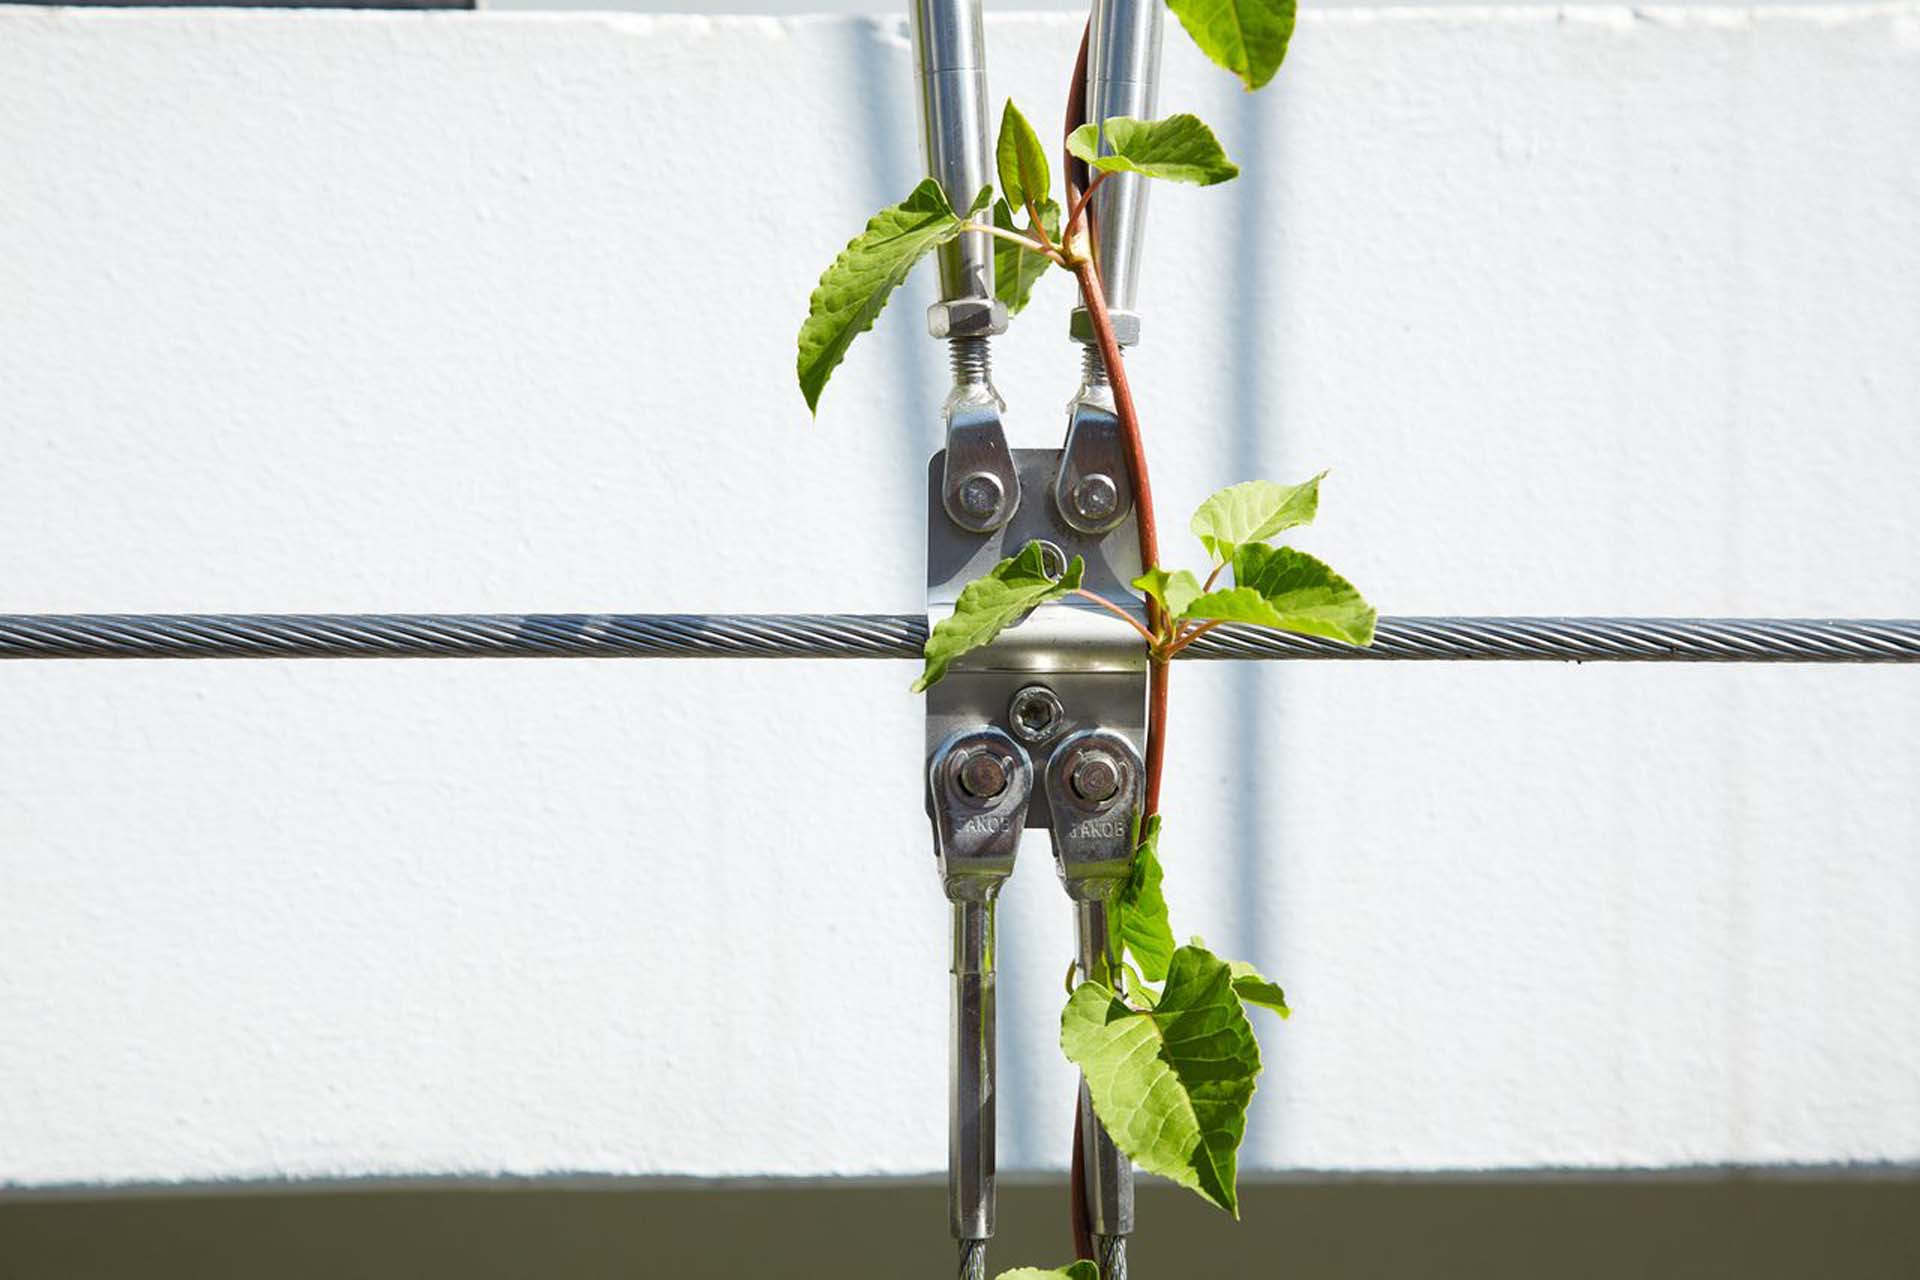 A plant climbing on steel cable and cable connector